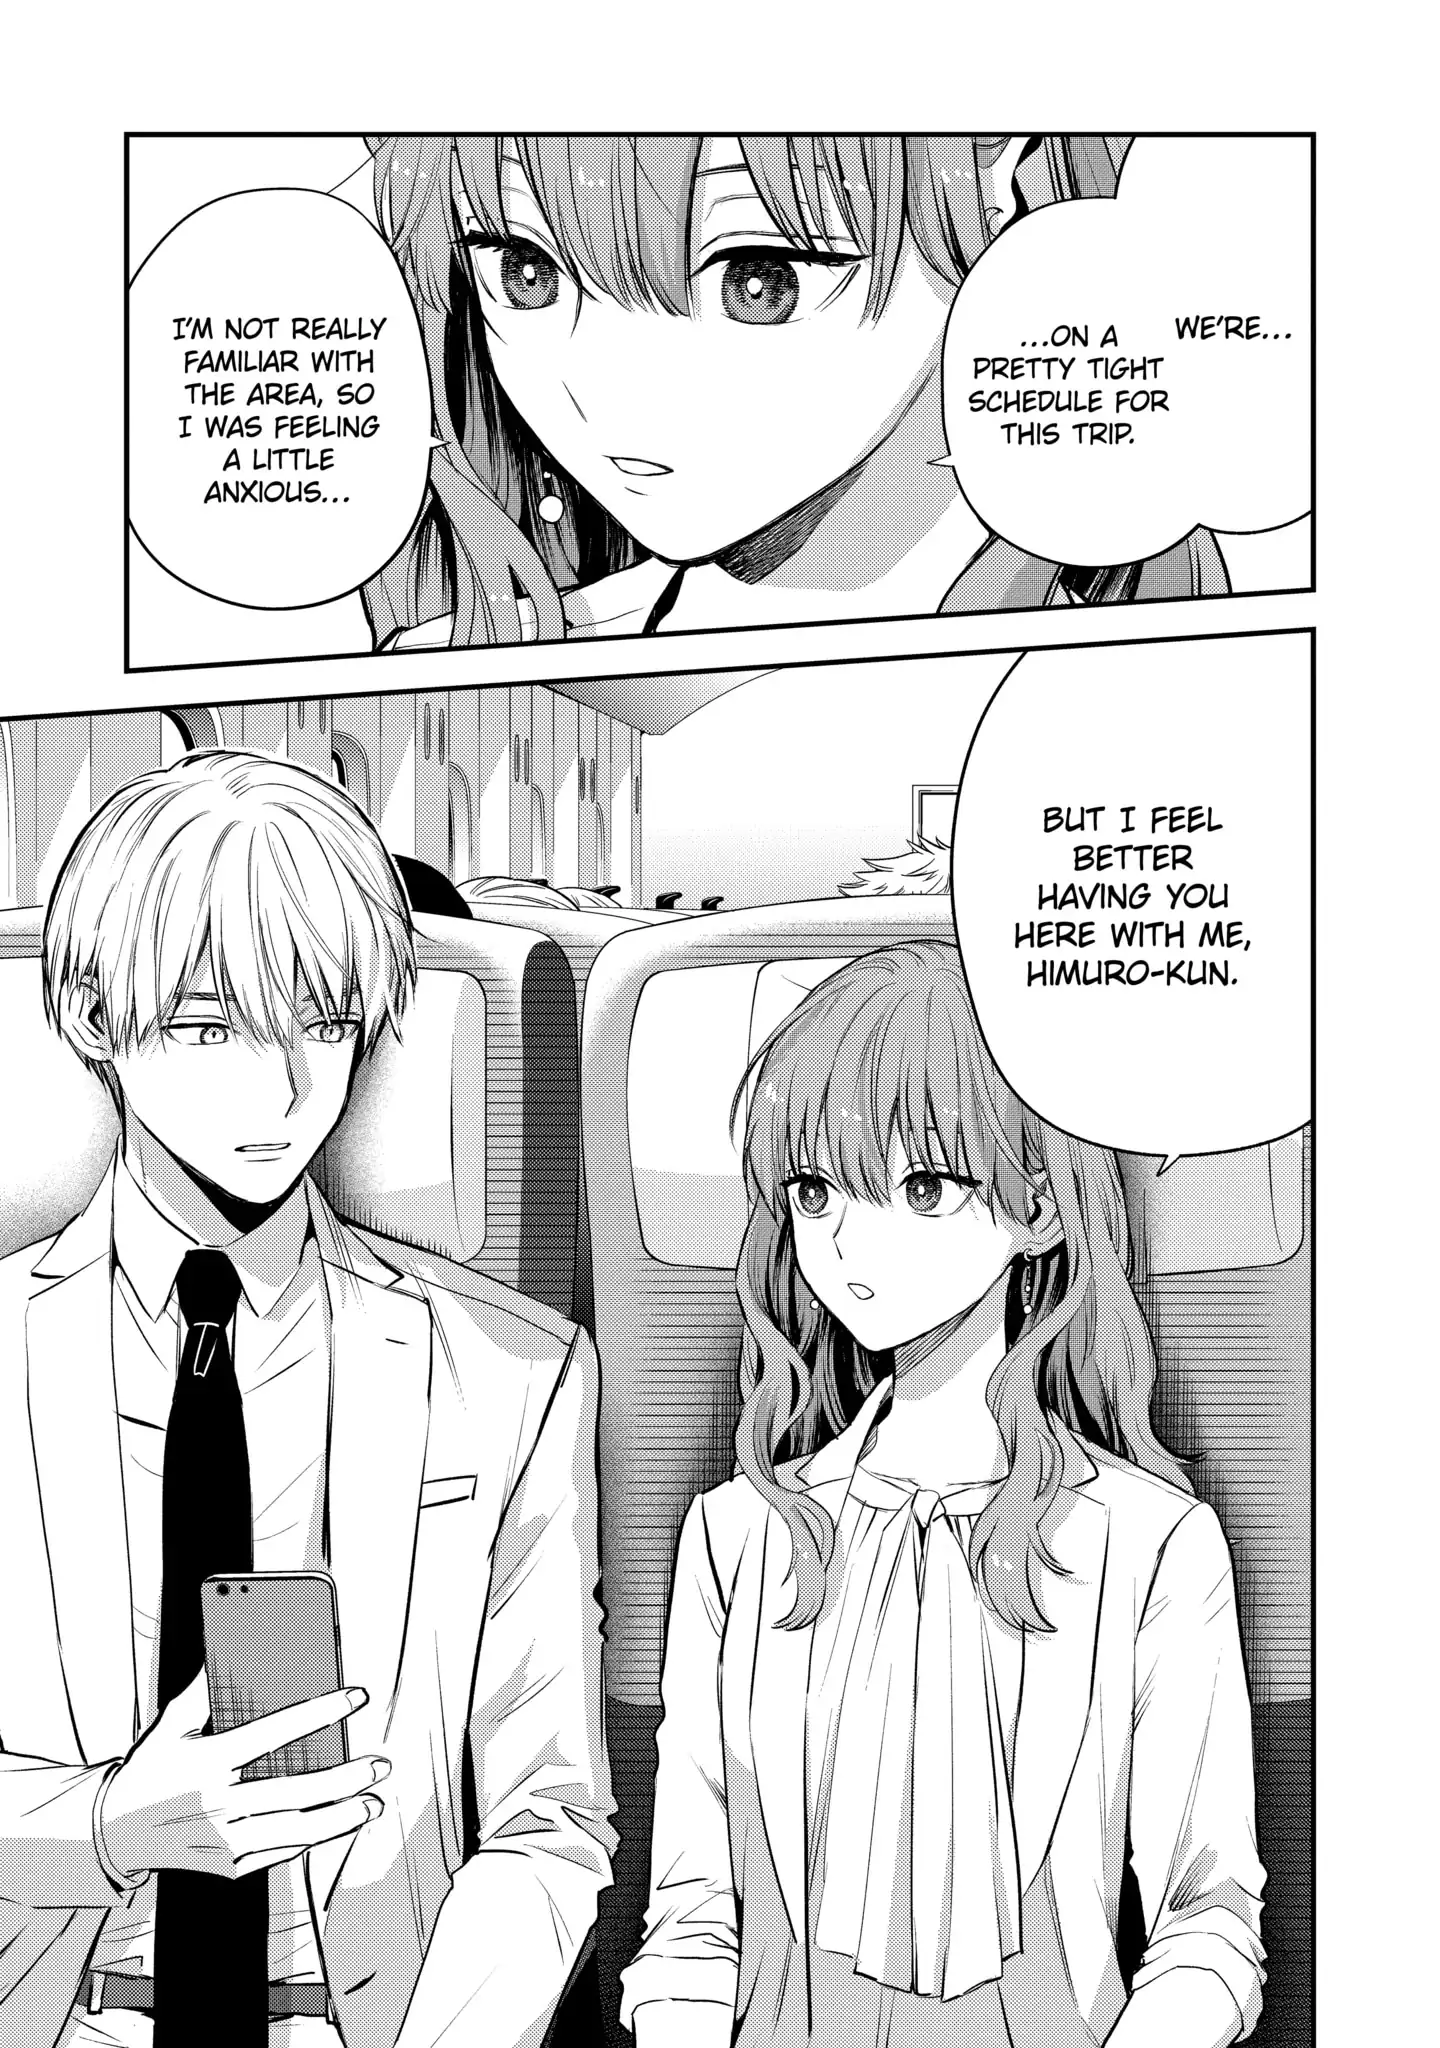 Ice Guy and the Cool Female Colleague - chapter 40.1 - #5